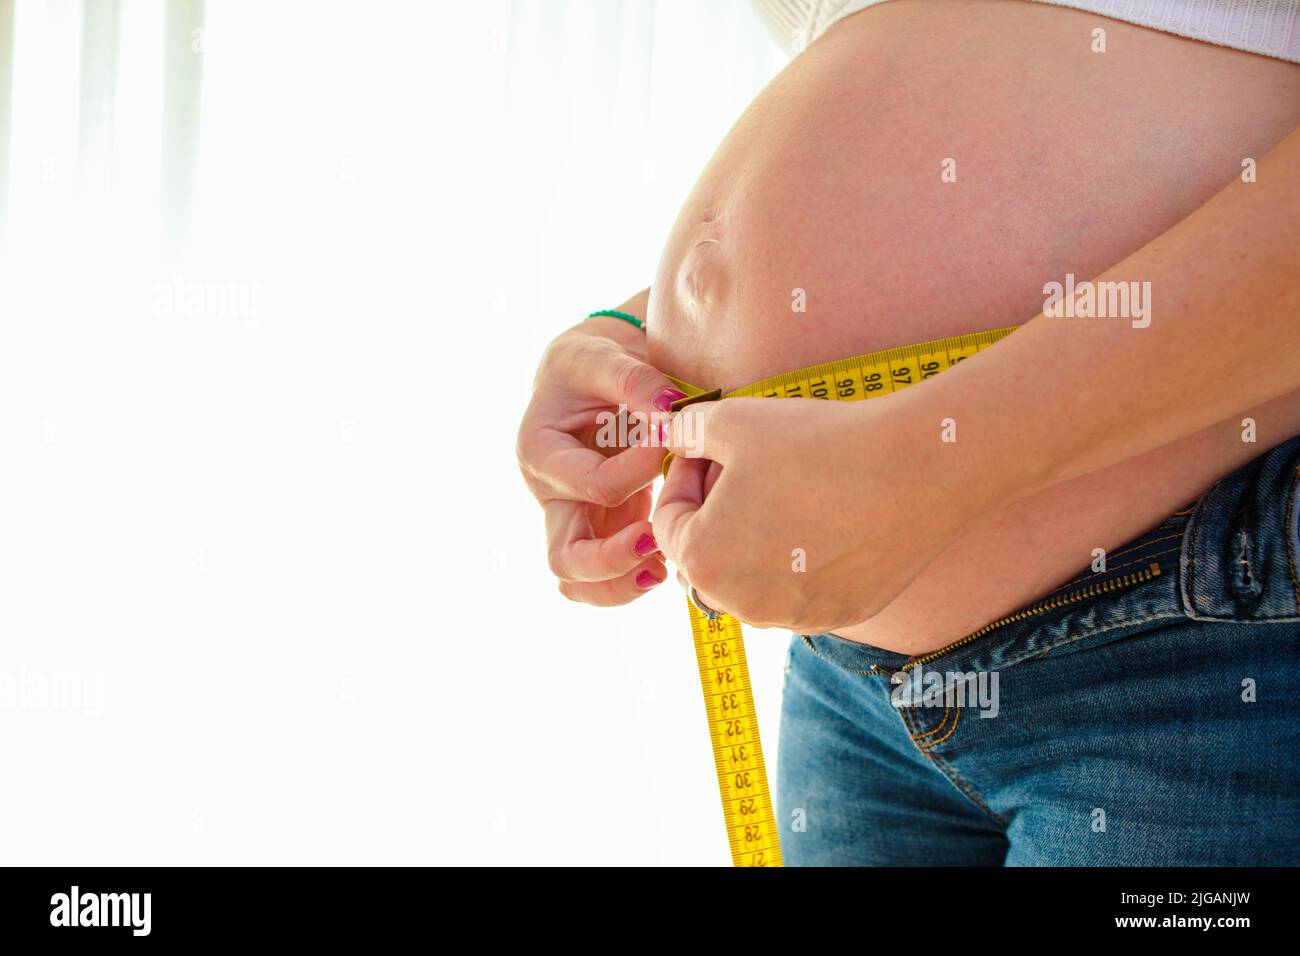 pregnant woman measuring her belly Stock Photo